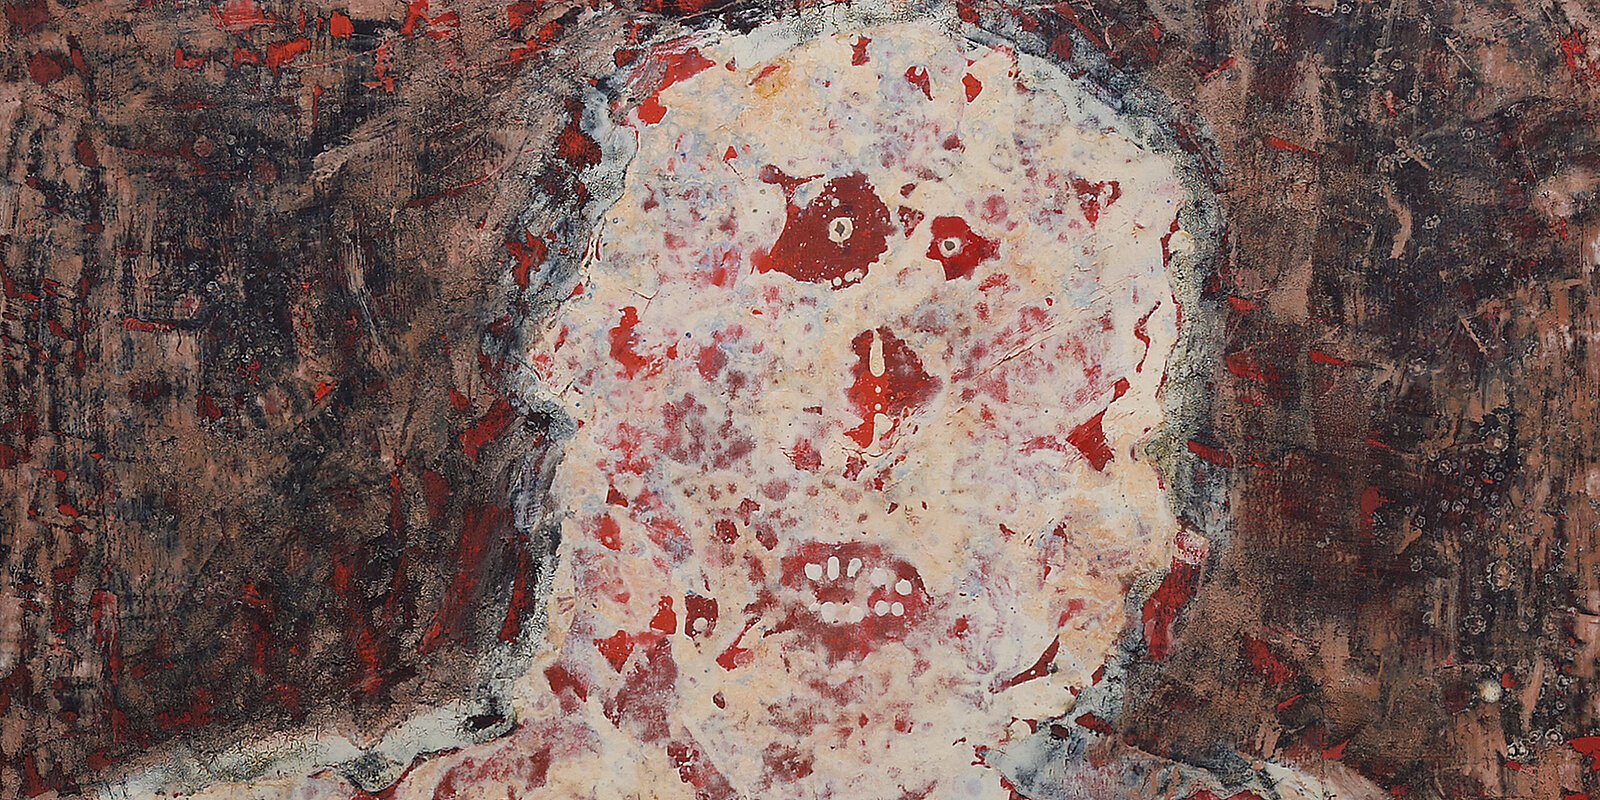 Jean Dubuffet, Intervention, 1954, Oil on canvas (detail)